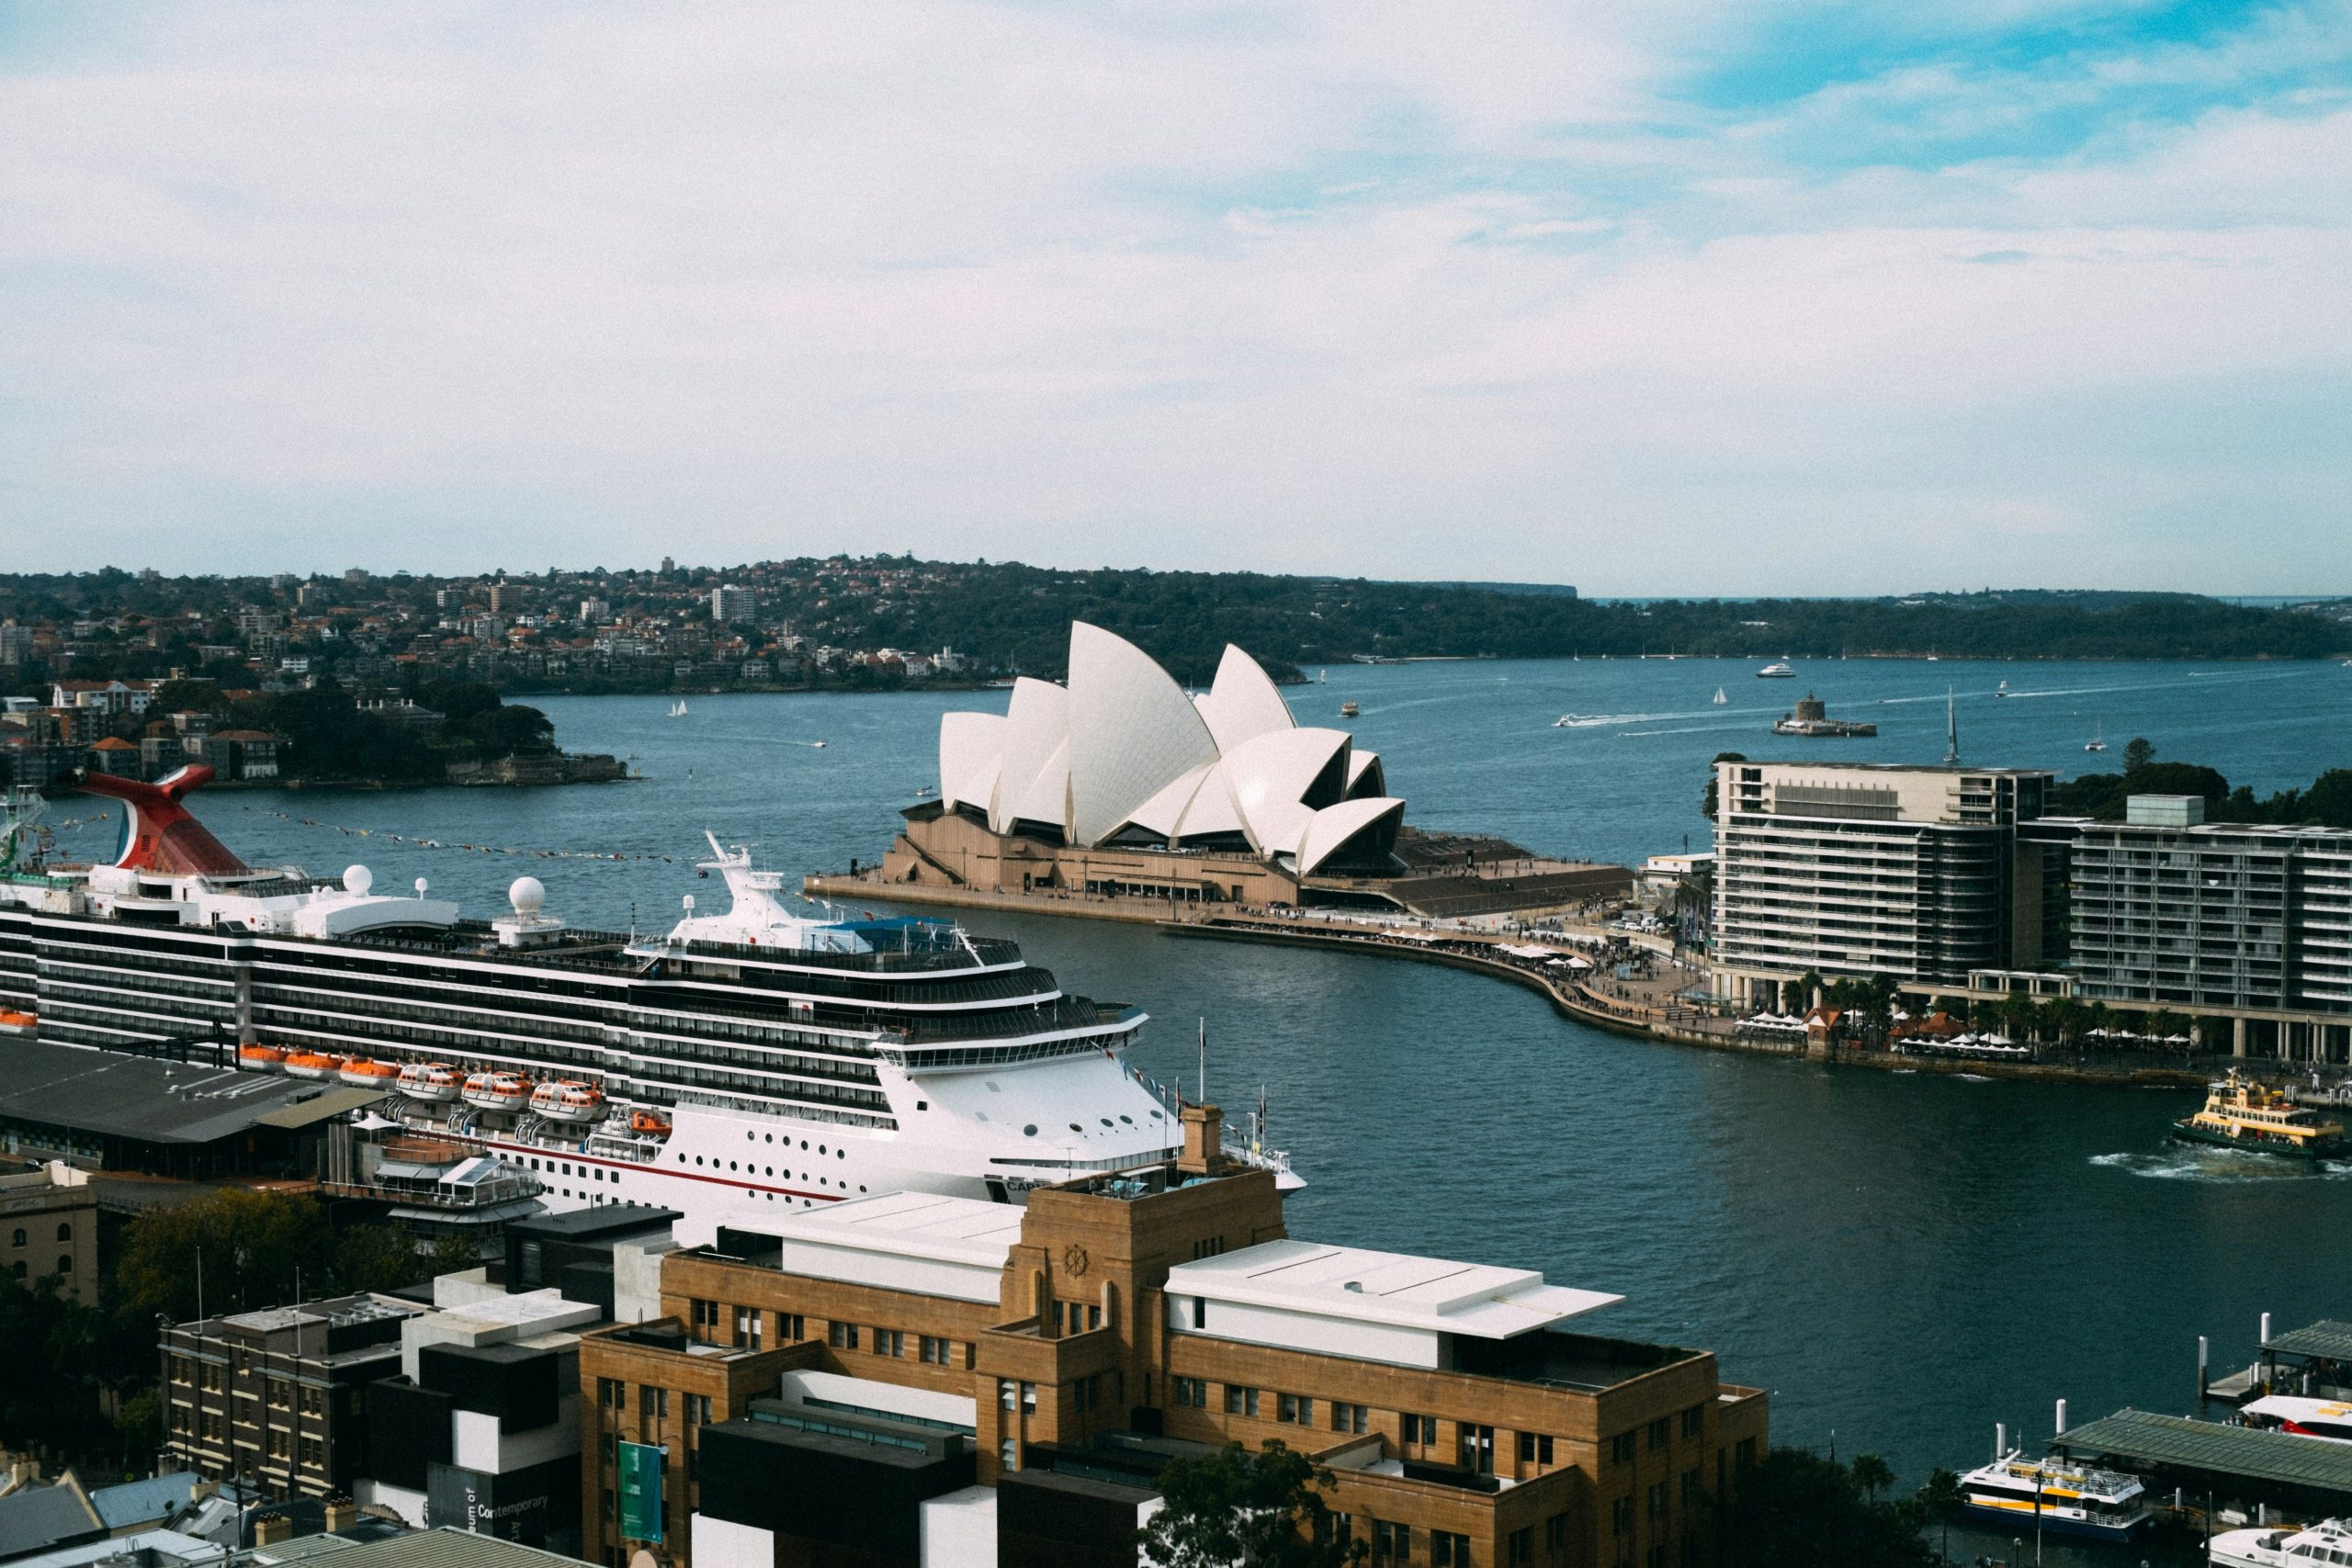 explore a variety of exciting cruise destinations and vacation packages with our incredible selection of cruises. book your dream cruise today and set sail for adventure.